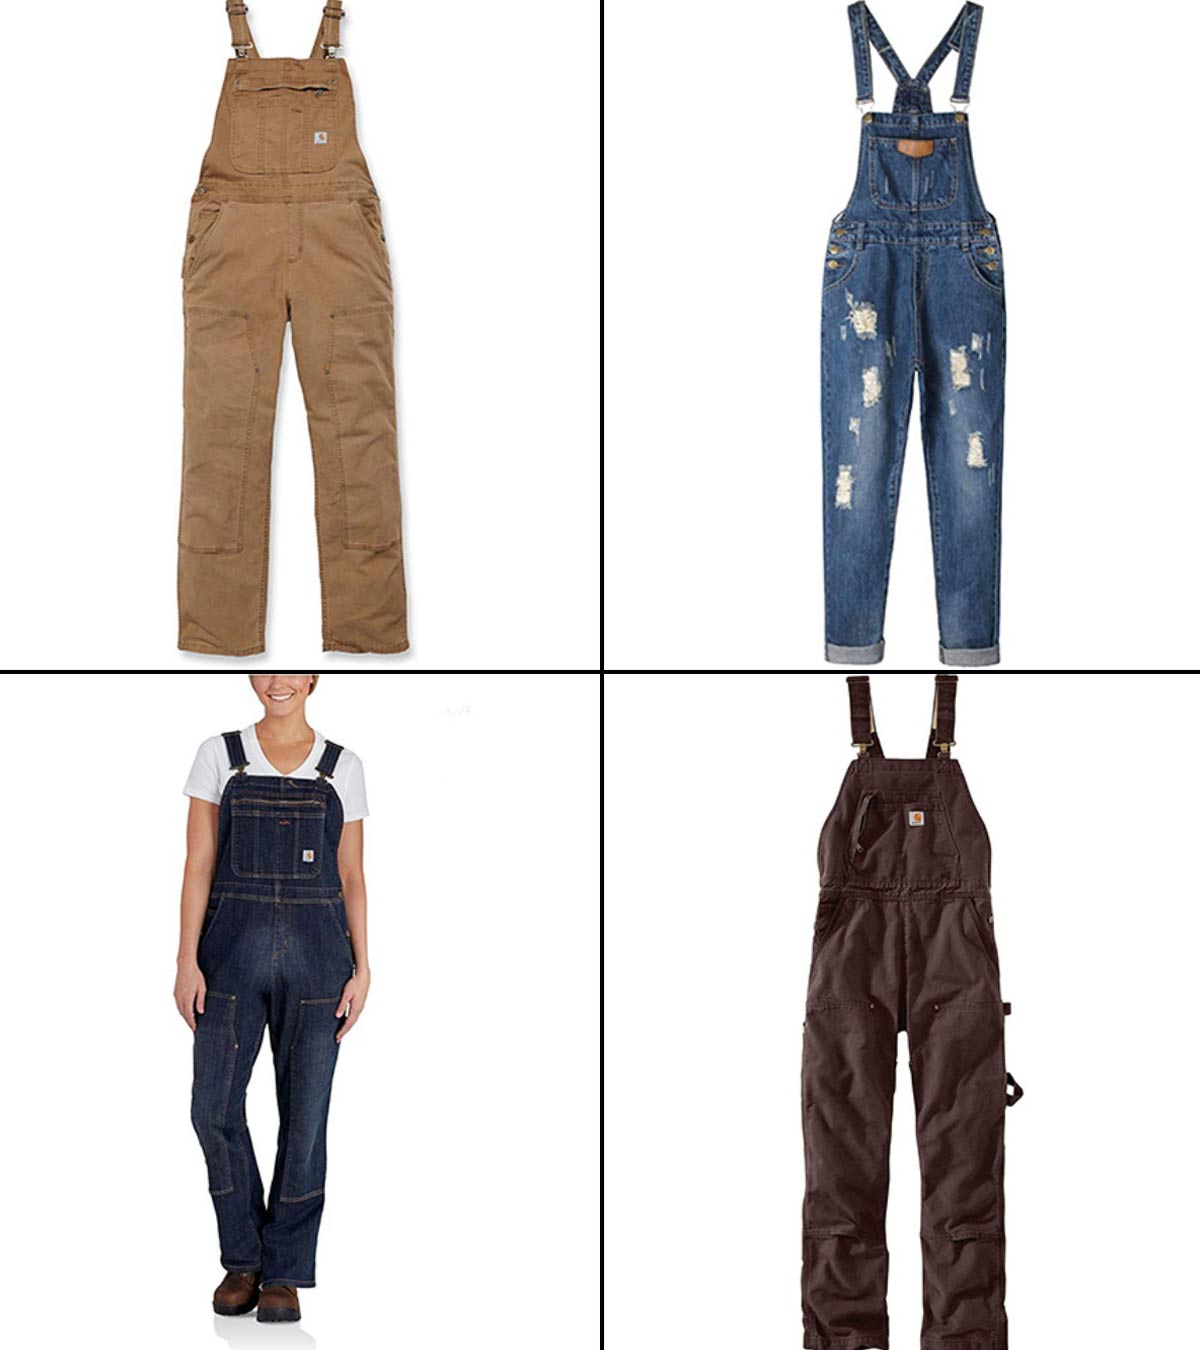 15 Best Overalls For Women To Look Stylish In 2023